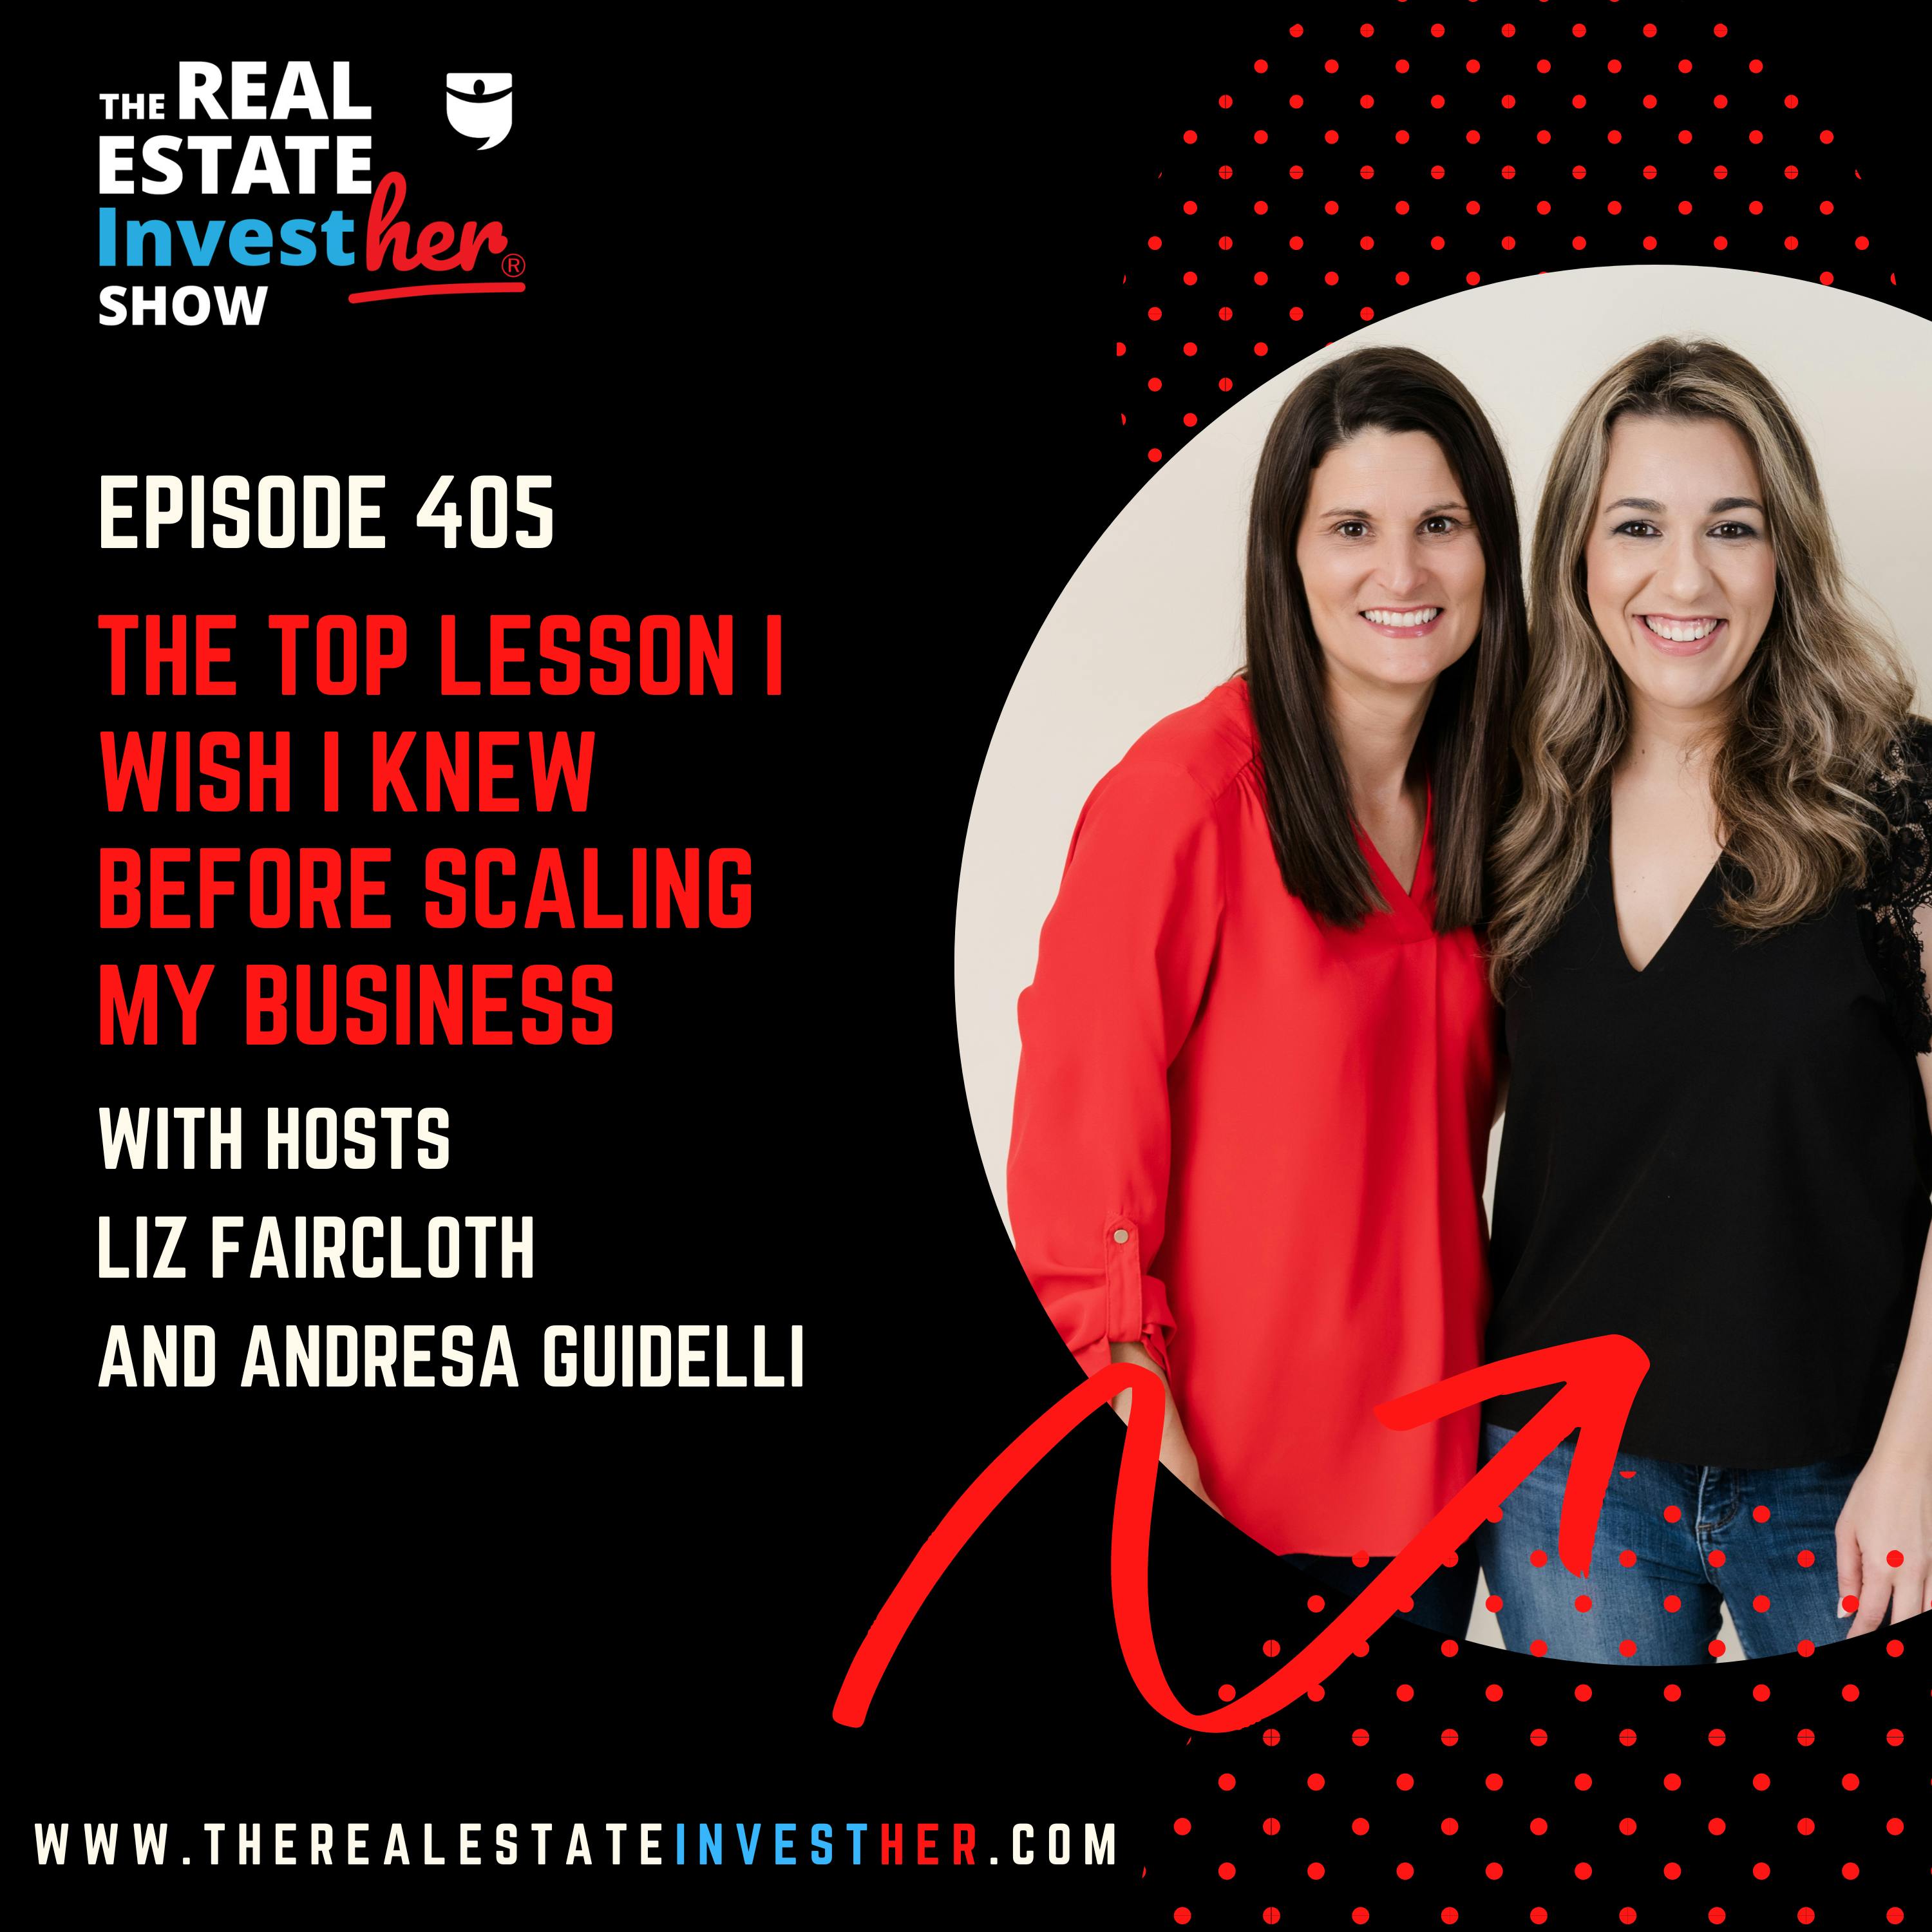 The Top Lesson I Wish I Knew Before Scaling My Business (Minisode)